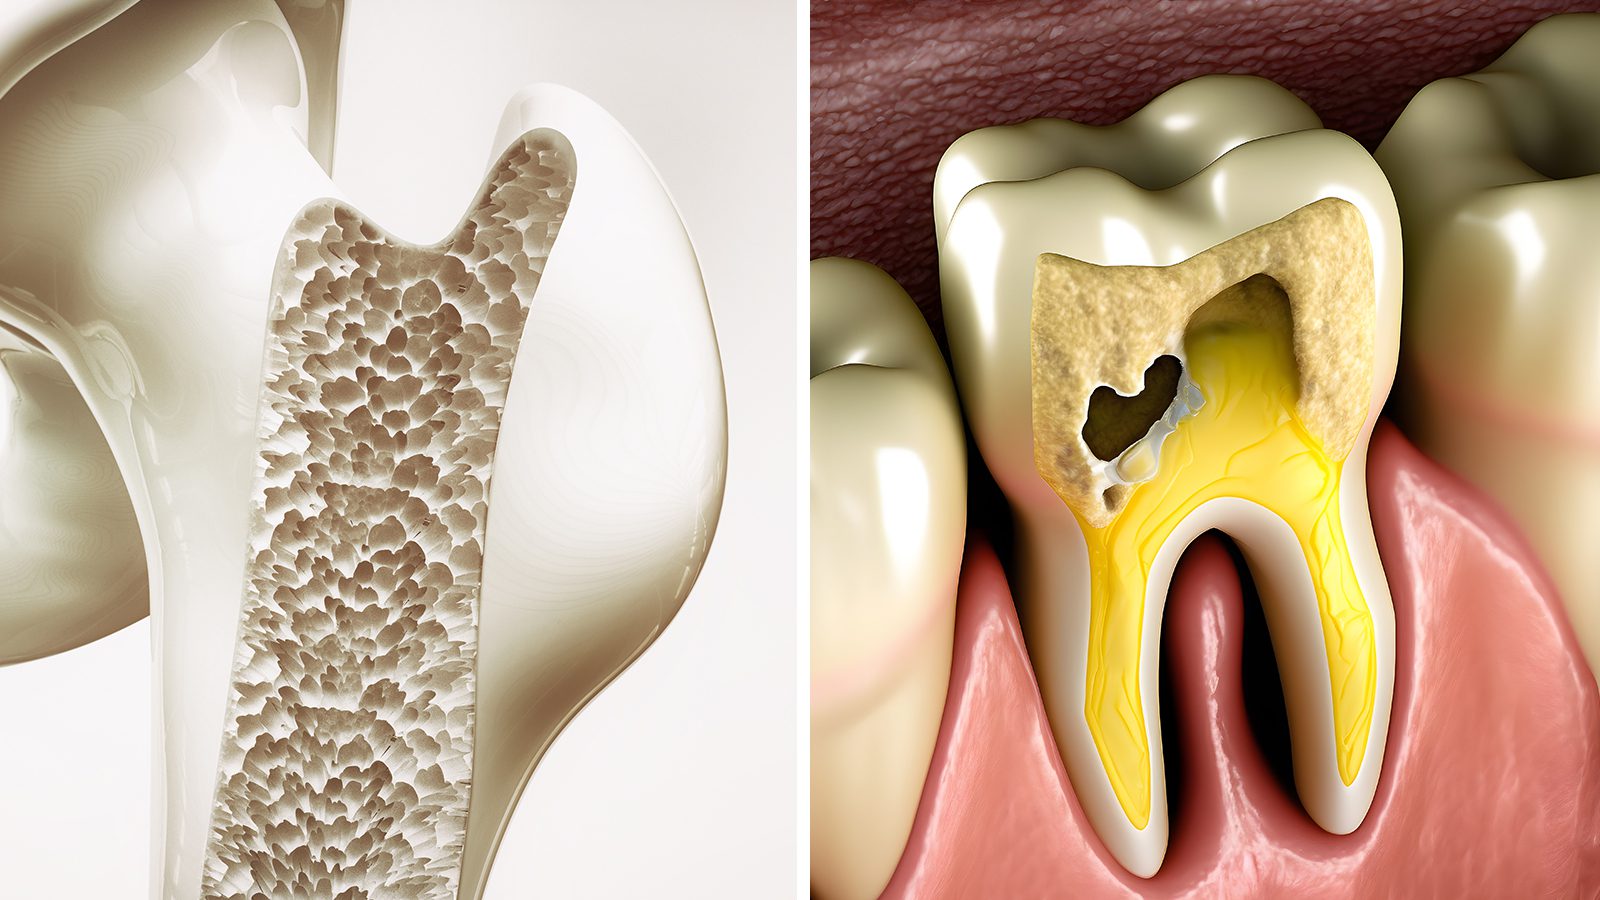 10 Things That Happen When Your Body Is Lacking Calcium [Video]